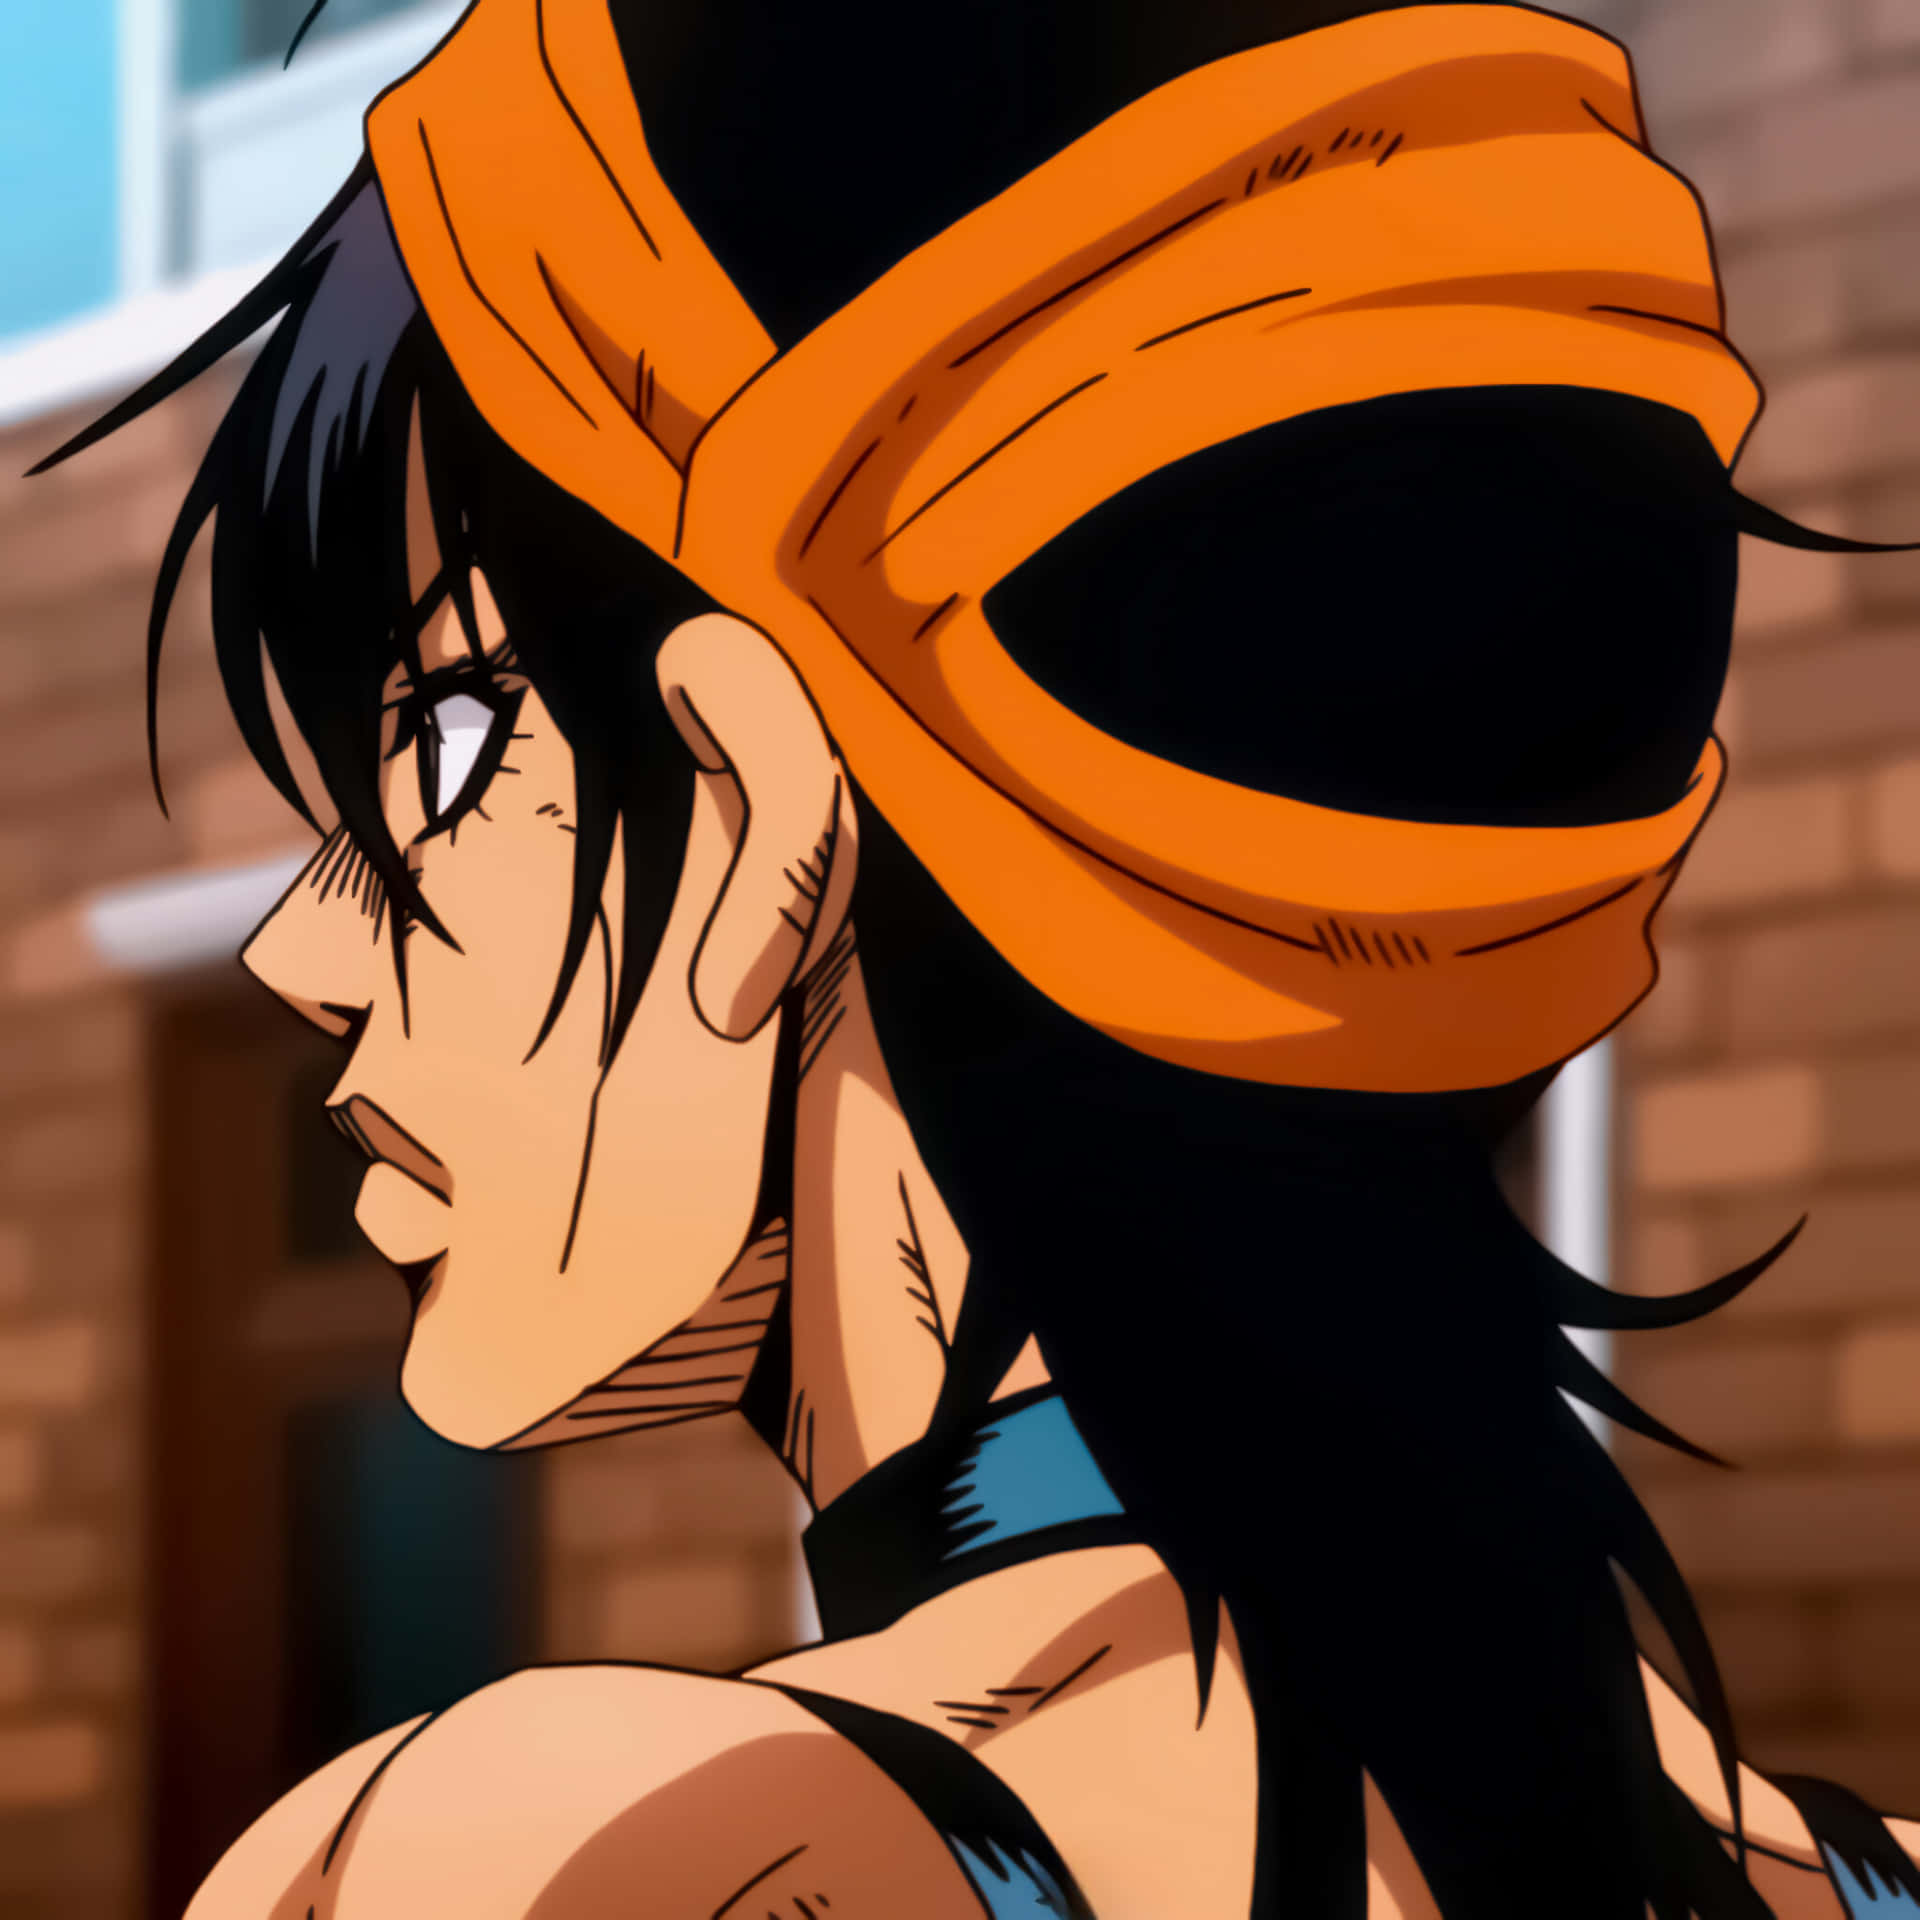 Cunning and Ambitious - Narancia Ghirga in Action Wallpaper